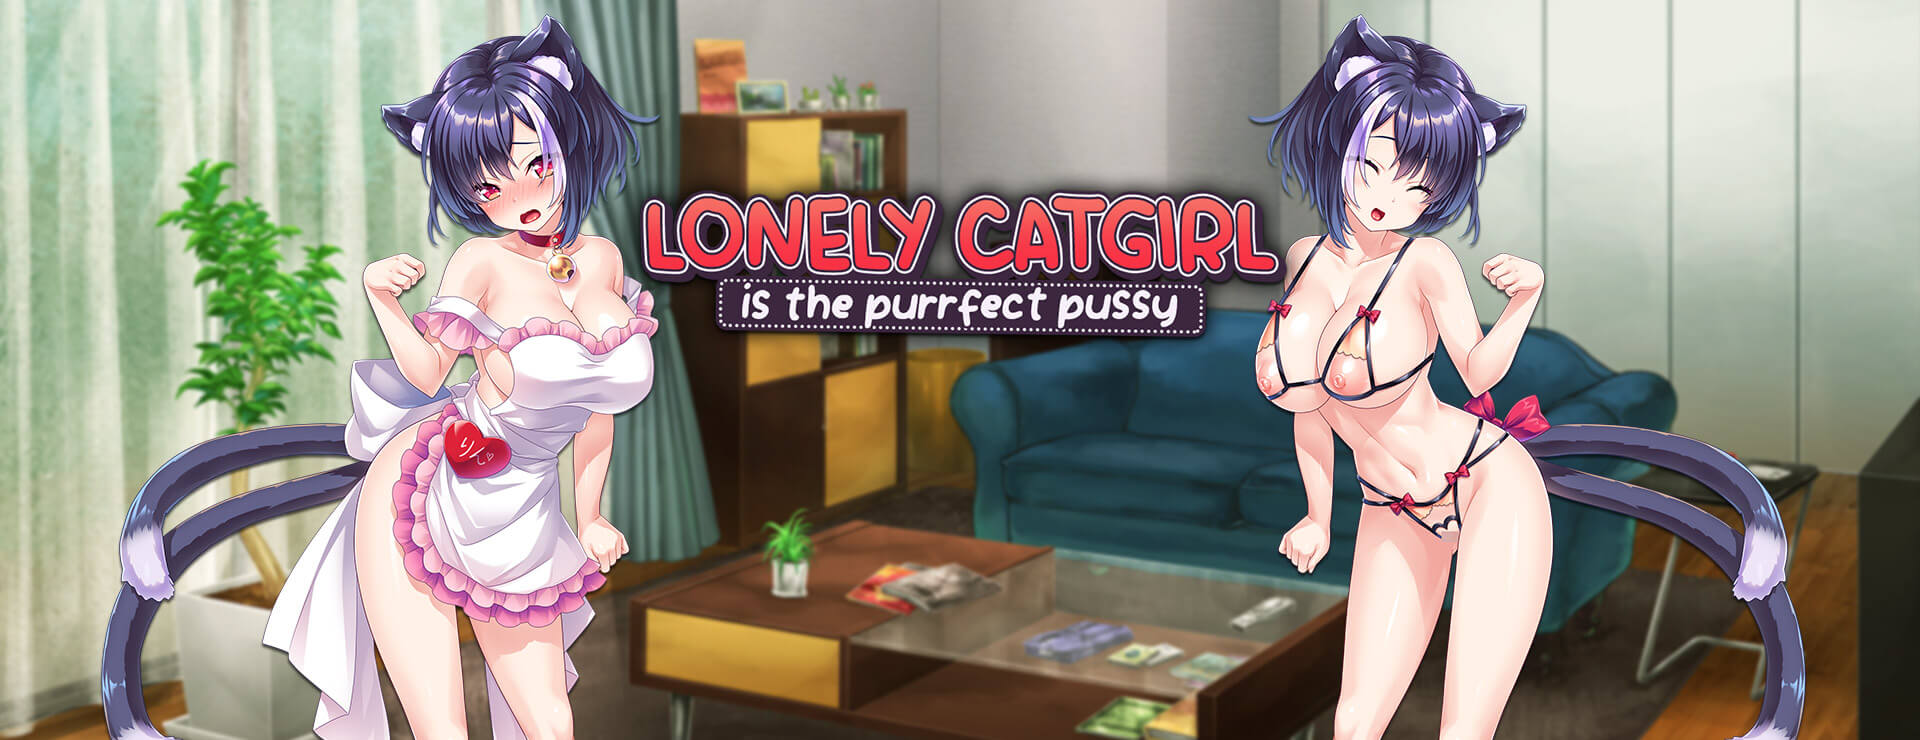 Lonely Catgirl is the Purrfect Pussy - Roman Visuel Jeu